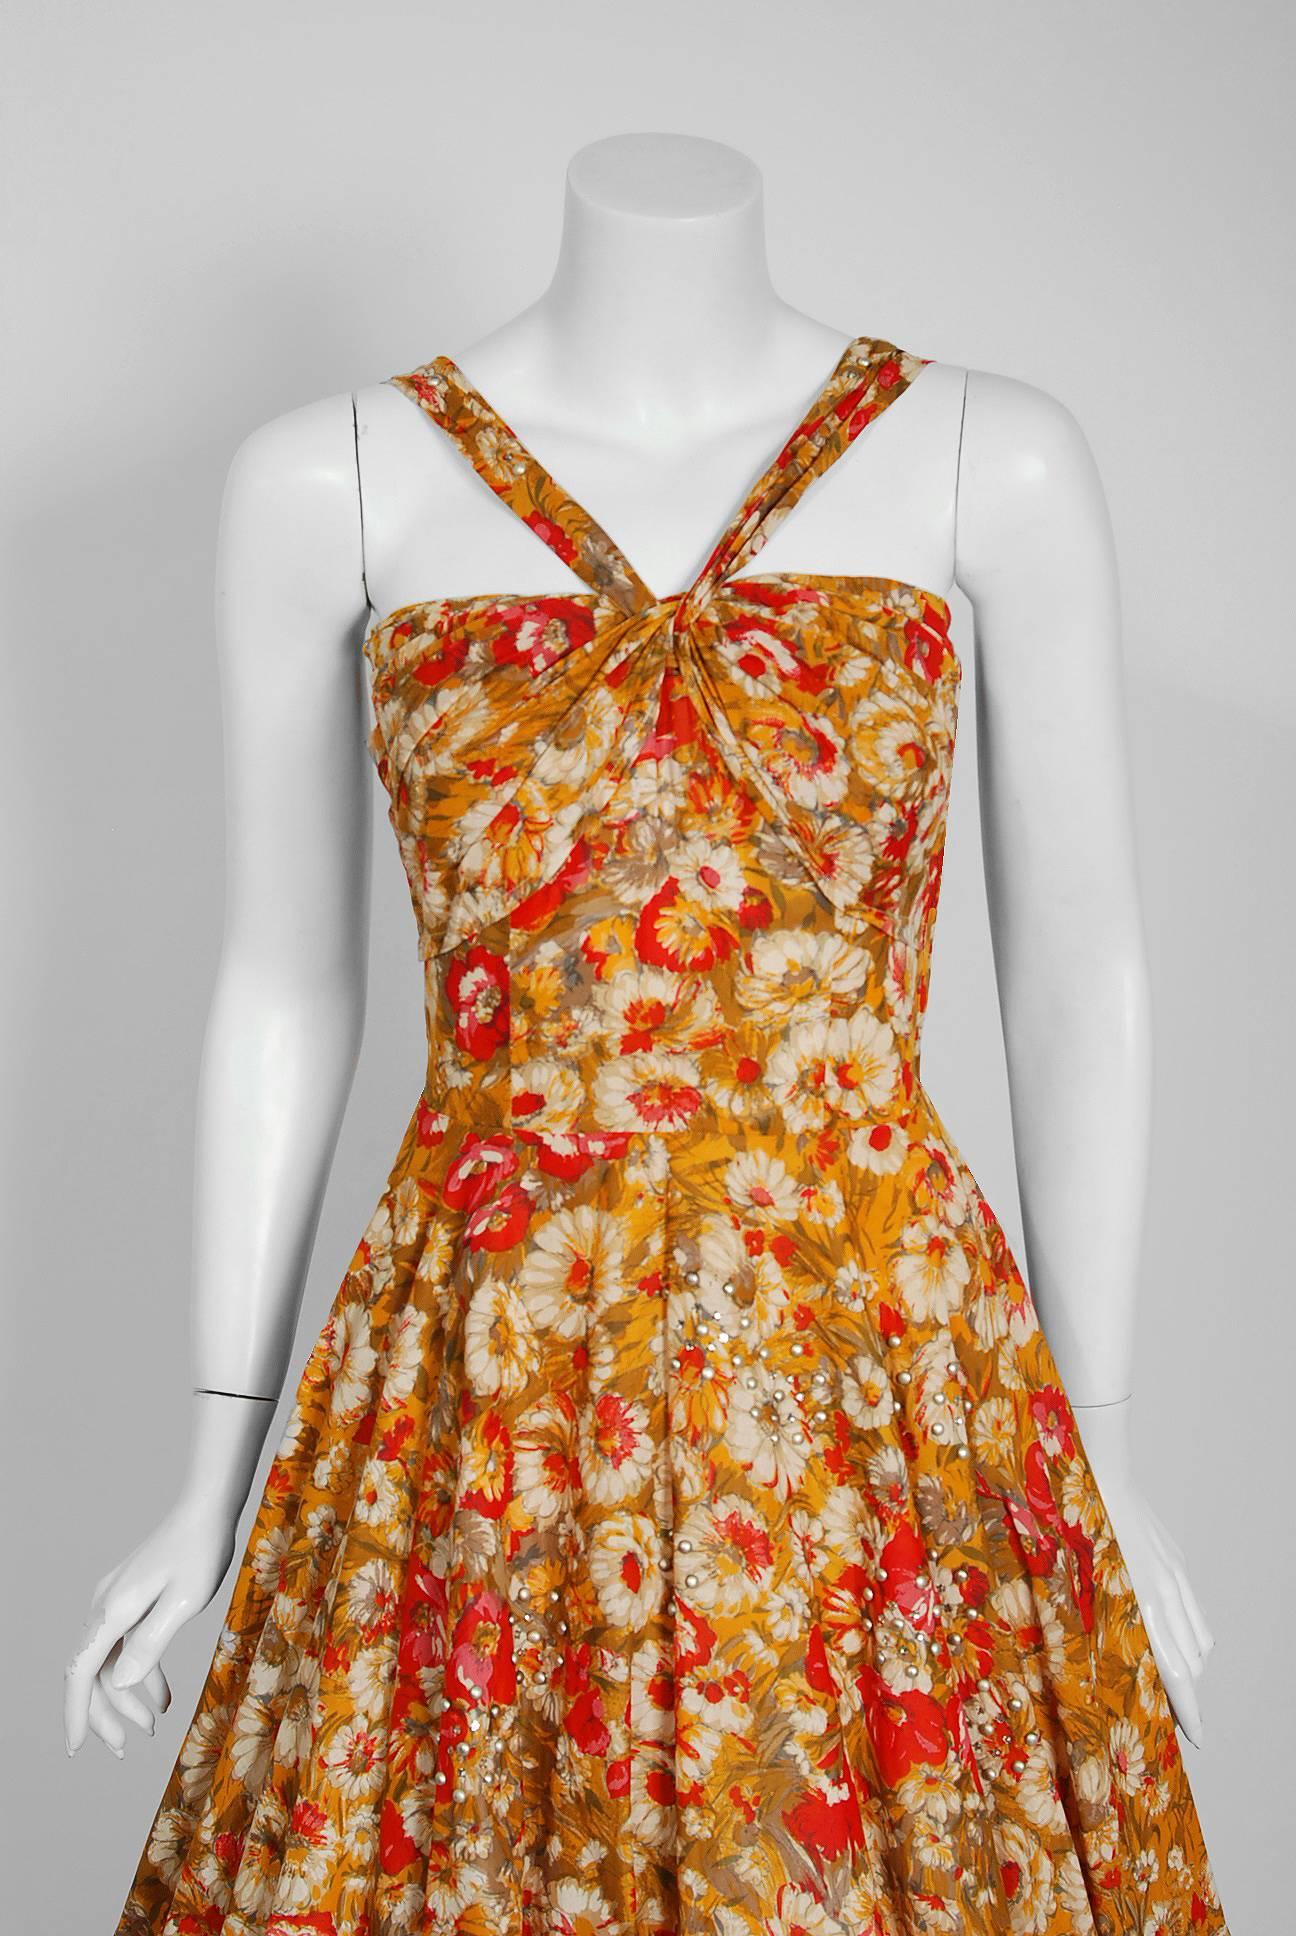 This gorgeous marigold daisies & red poppies floral print sundress by Aywon Originals is the perfect addition to any vintage wardrobe. The bodice has an alluring mock halter sculpted shelf-bust design. The hourglass nipped waistline is both ladylike